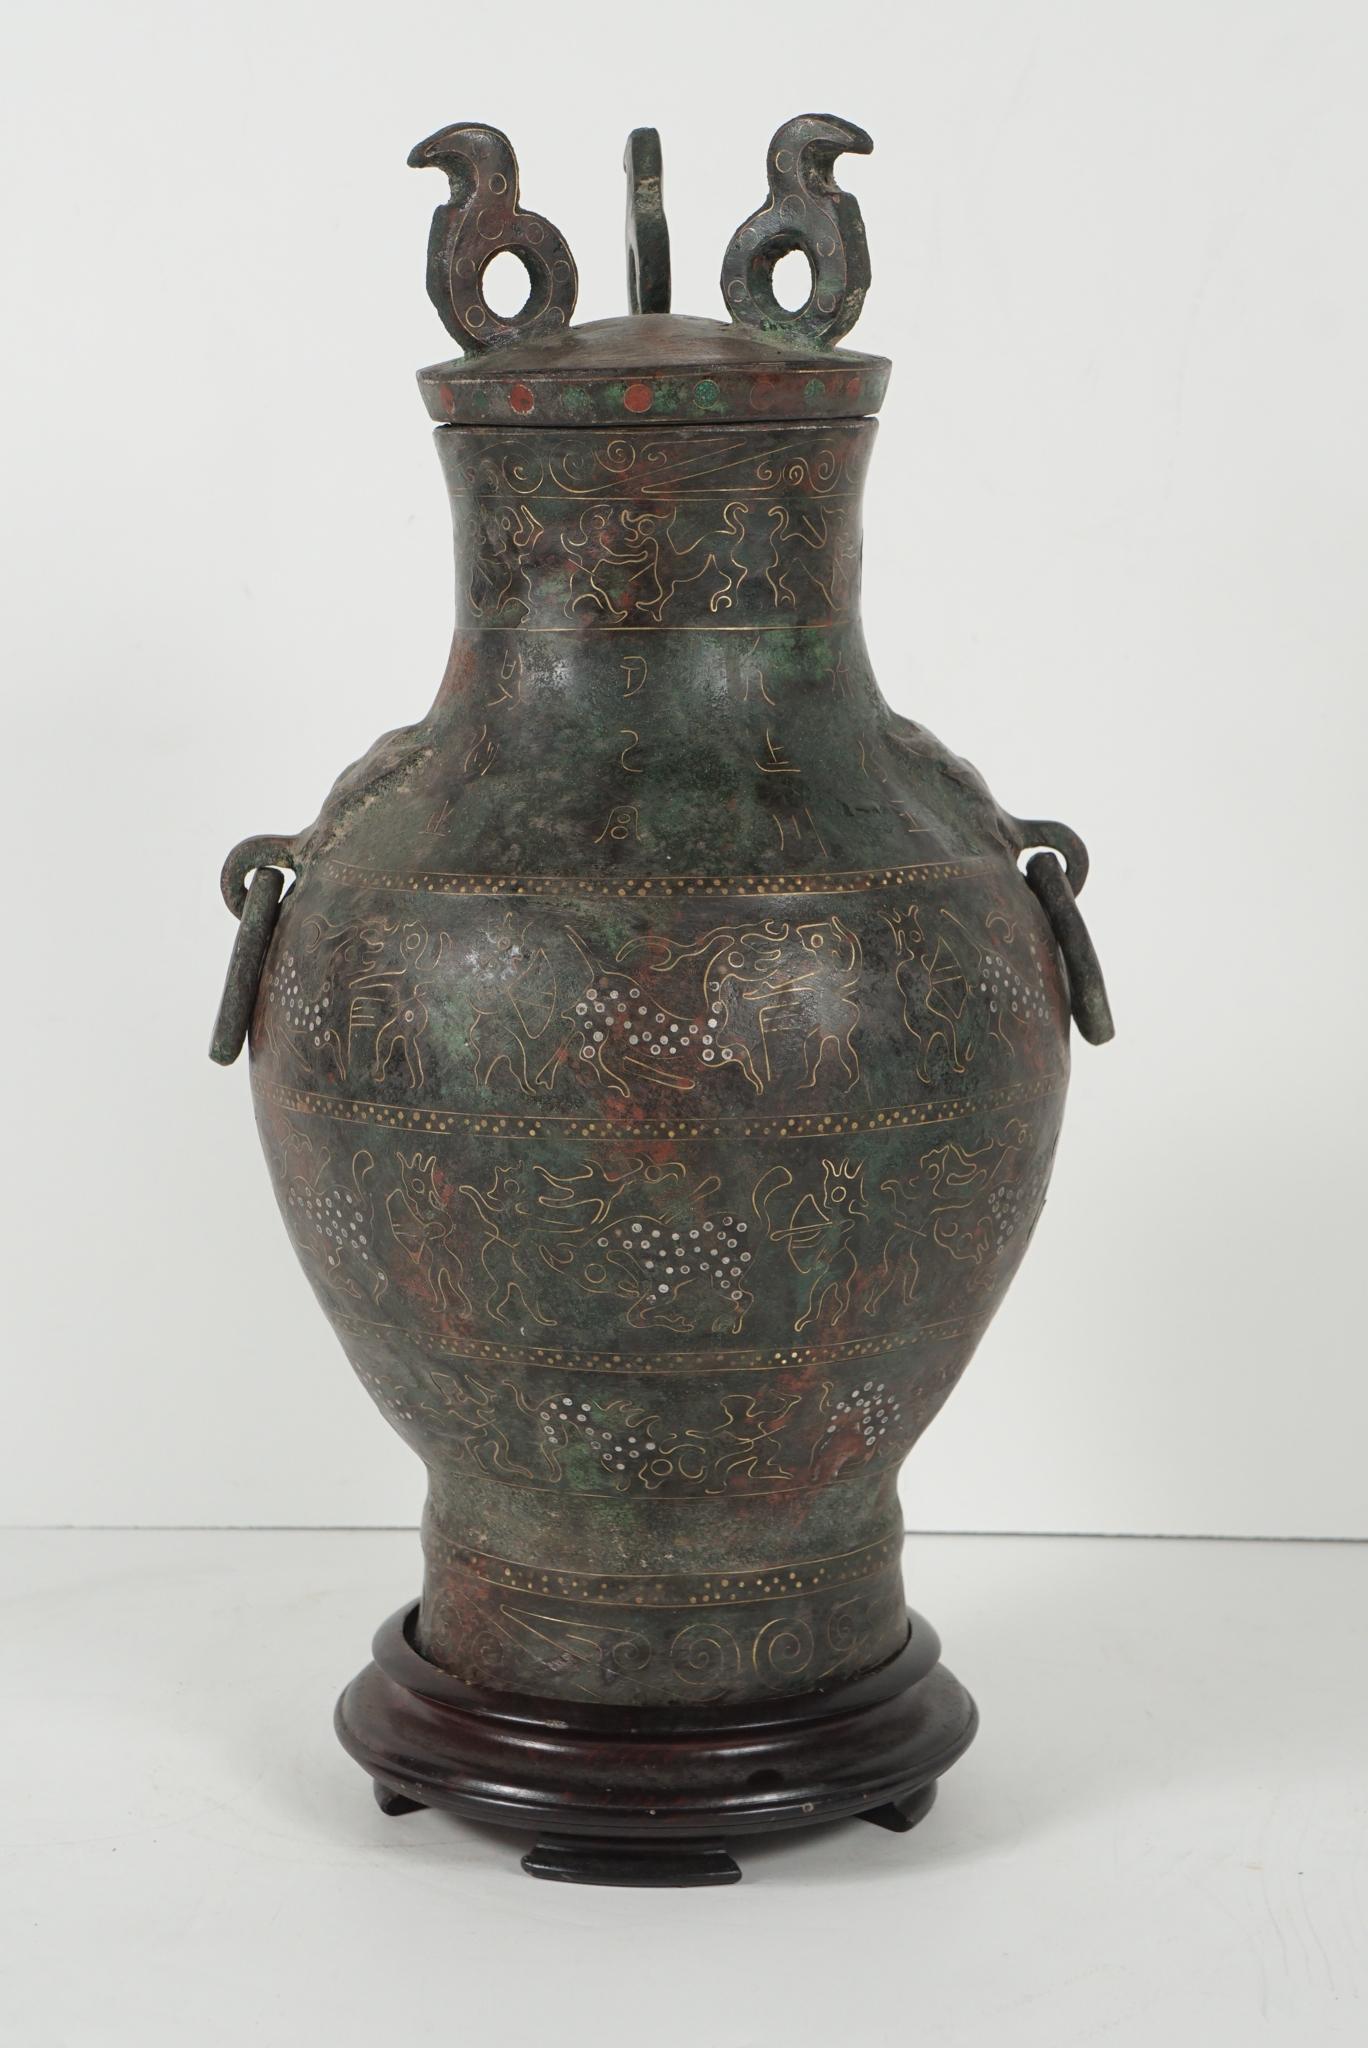 This cast bronze vessel was made in China as an honorific presentation circa 1920. Cast in the style of the Zhou dynasty it would have been used ritually as a wine container and placed in tombs as an offering. The Chinese have for centuries created